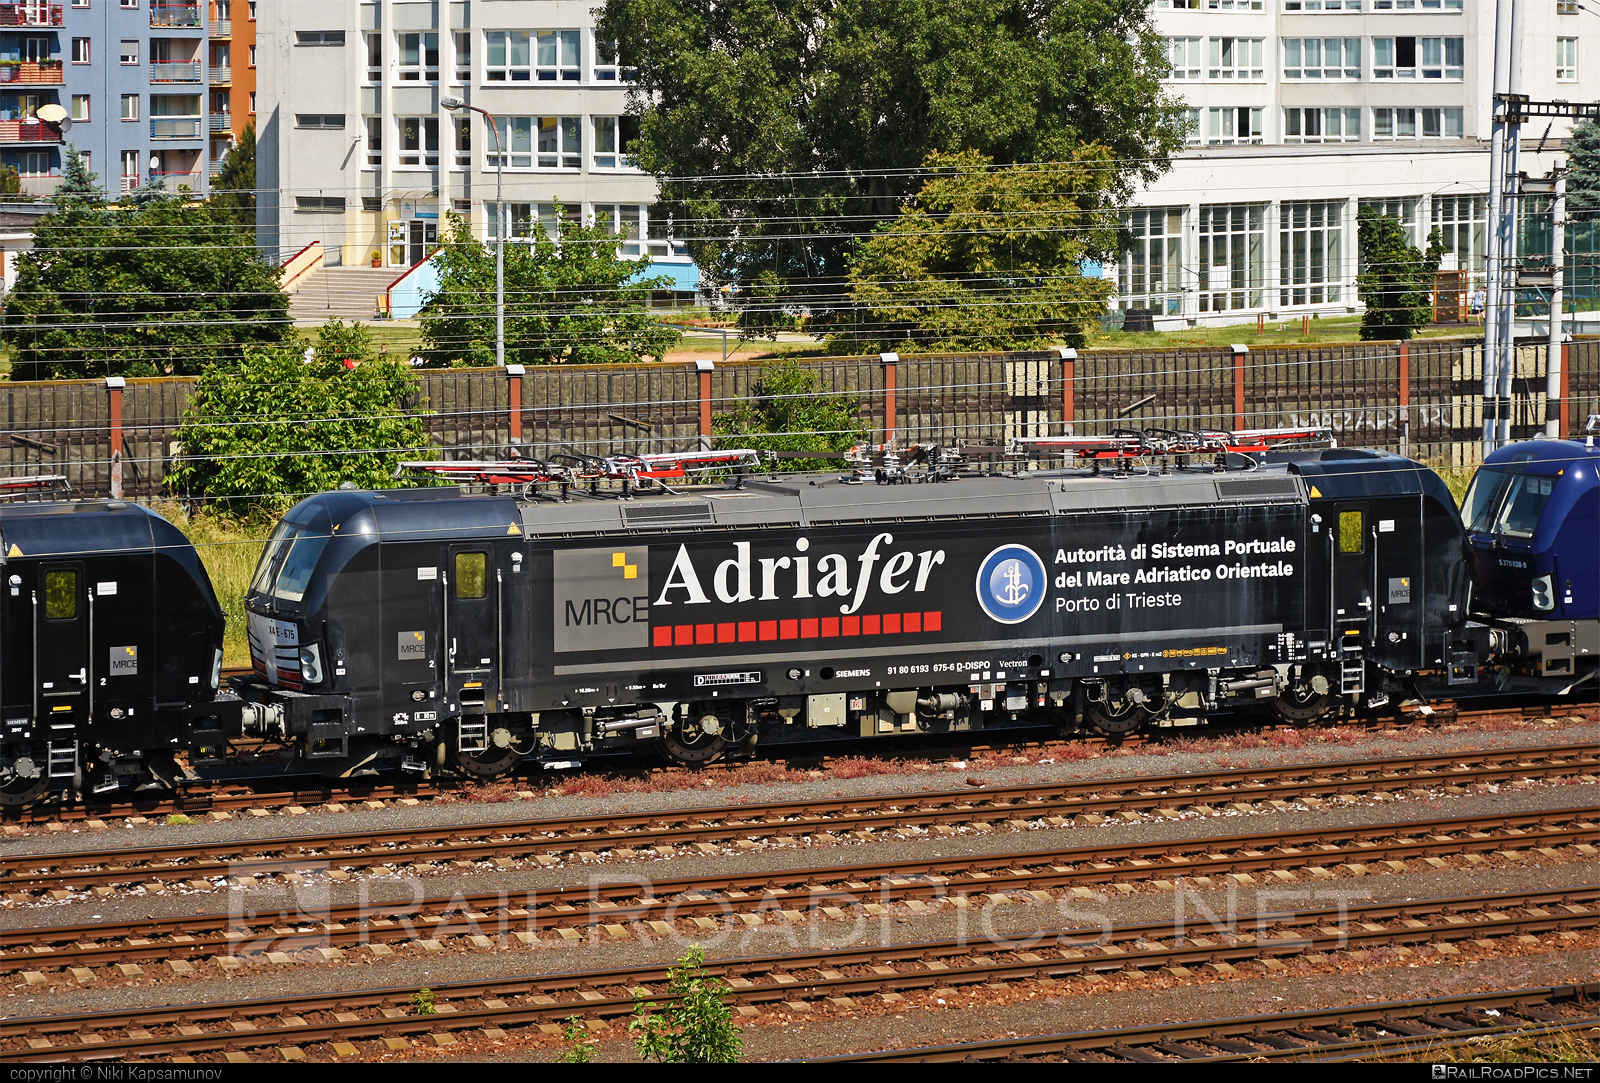 Siemens Vectron MS - 193 675-6 operated by ADRIAFER S.R.L. #adriafer #dispolok #mitsuirailcapitaleurope #mitsuirailcapitaleuropegmbh #mrce #siemens #siemensvectron #siemensvectronms #vectron #vectronms